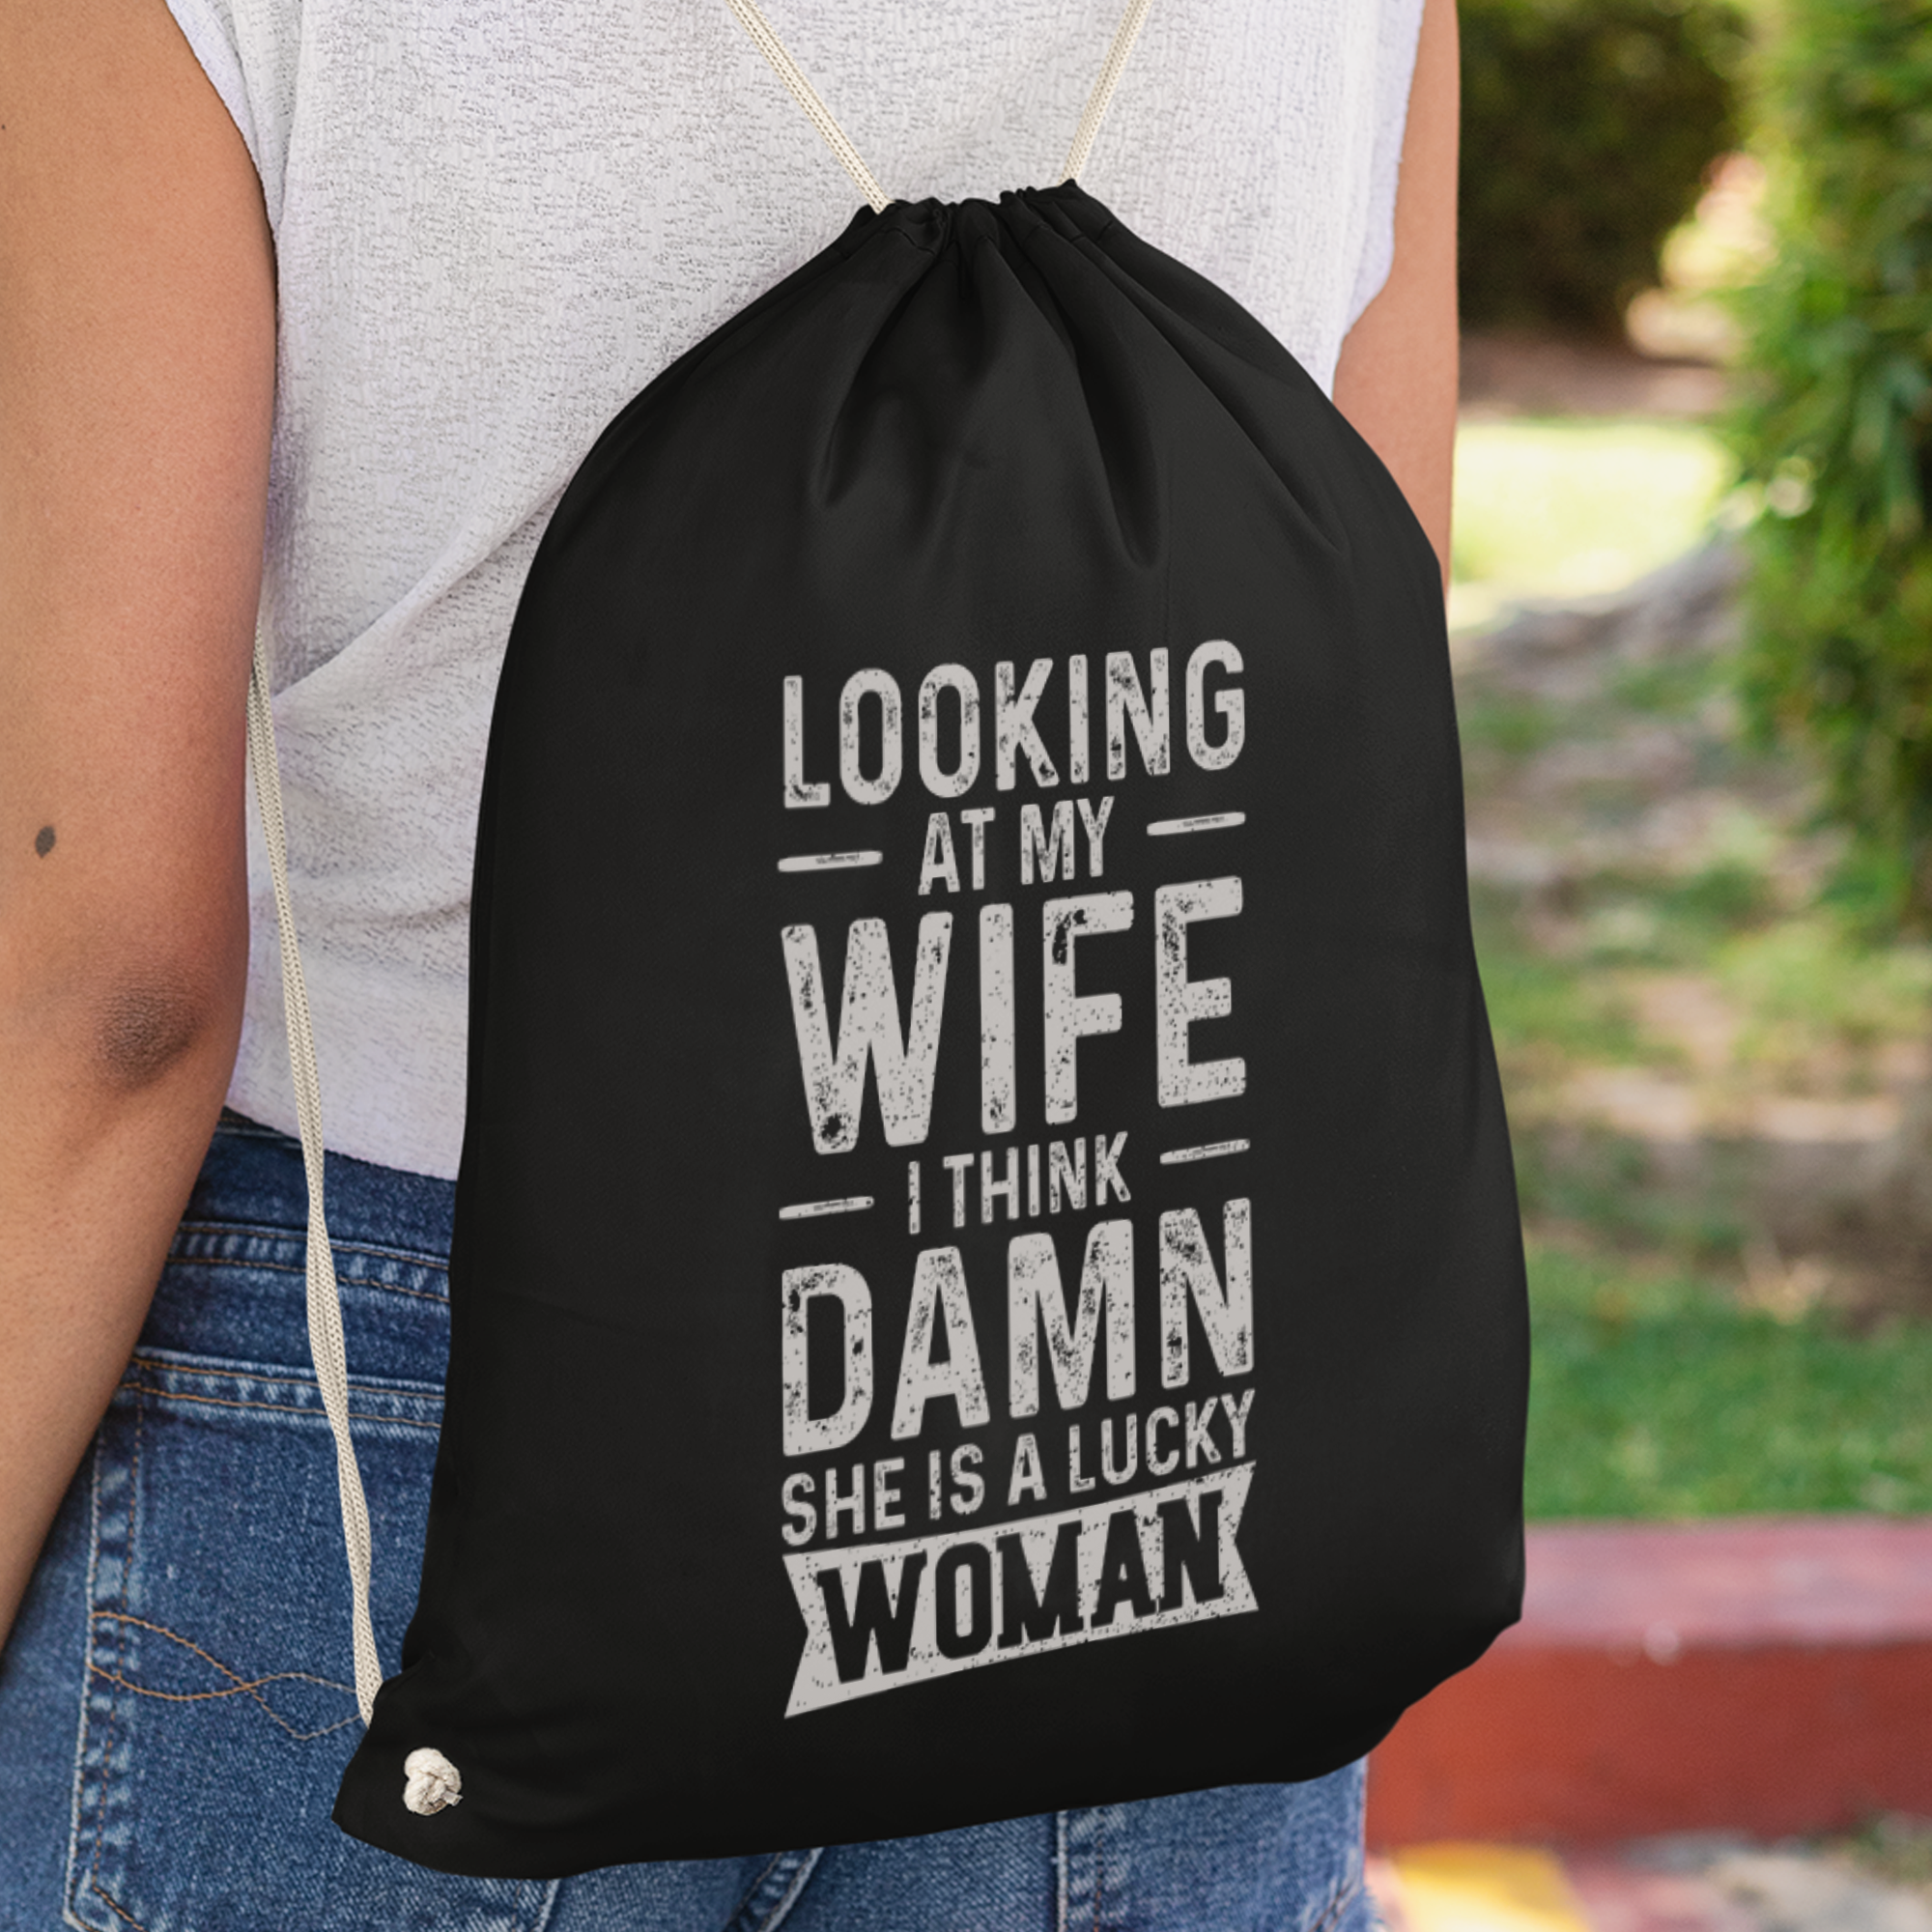 Looking At My Wife I Think Damn She Is A Lucky Woman Turnbeutel - DESIGNSBYJNK5.COM